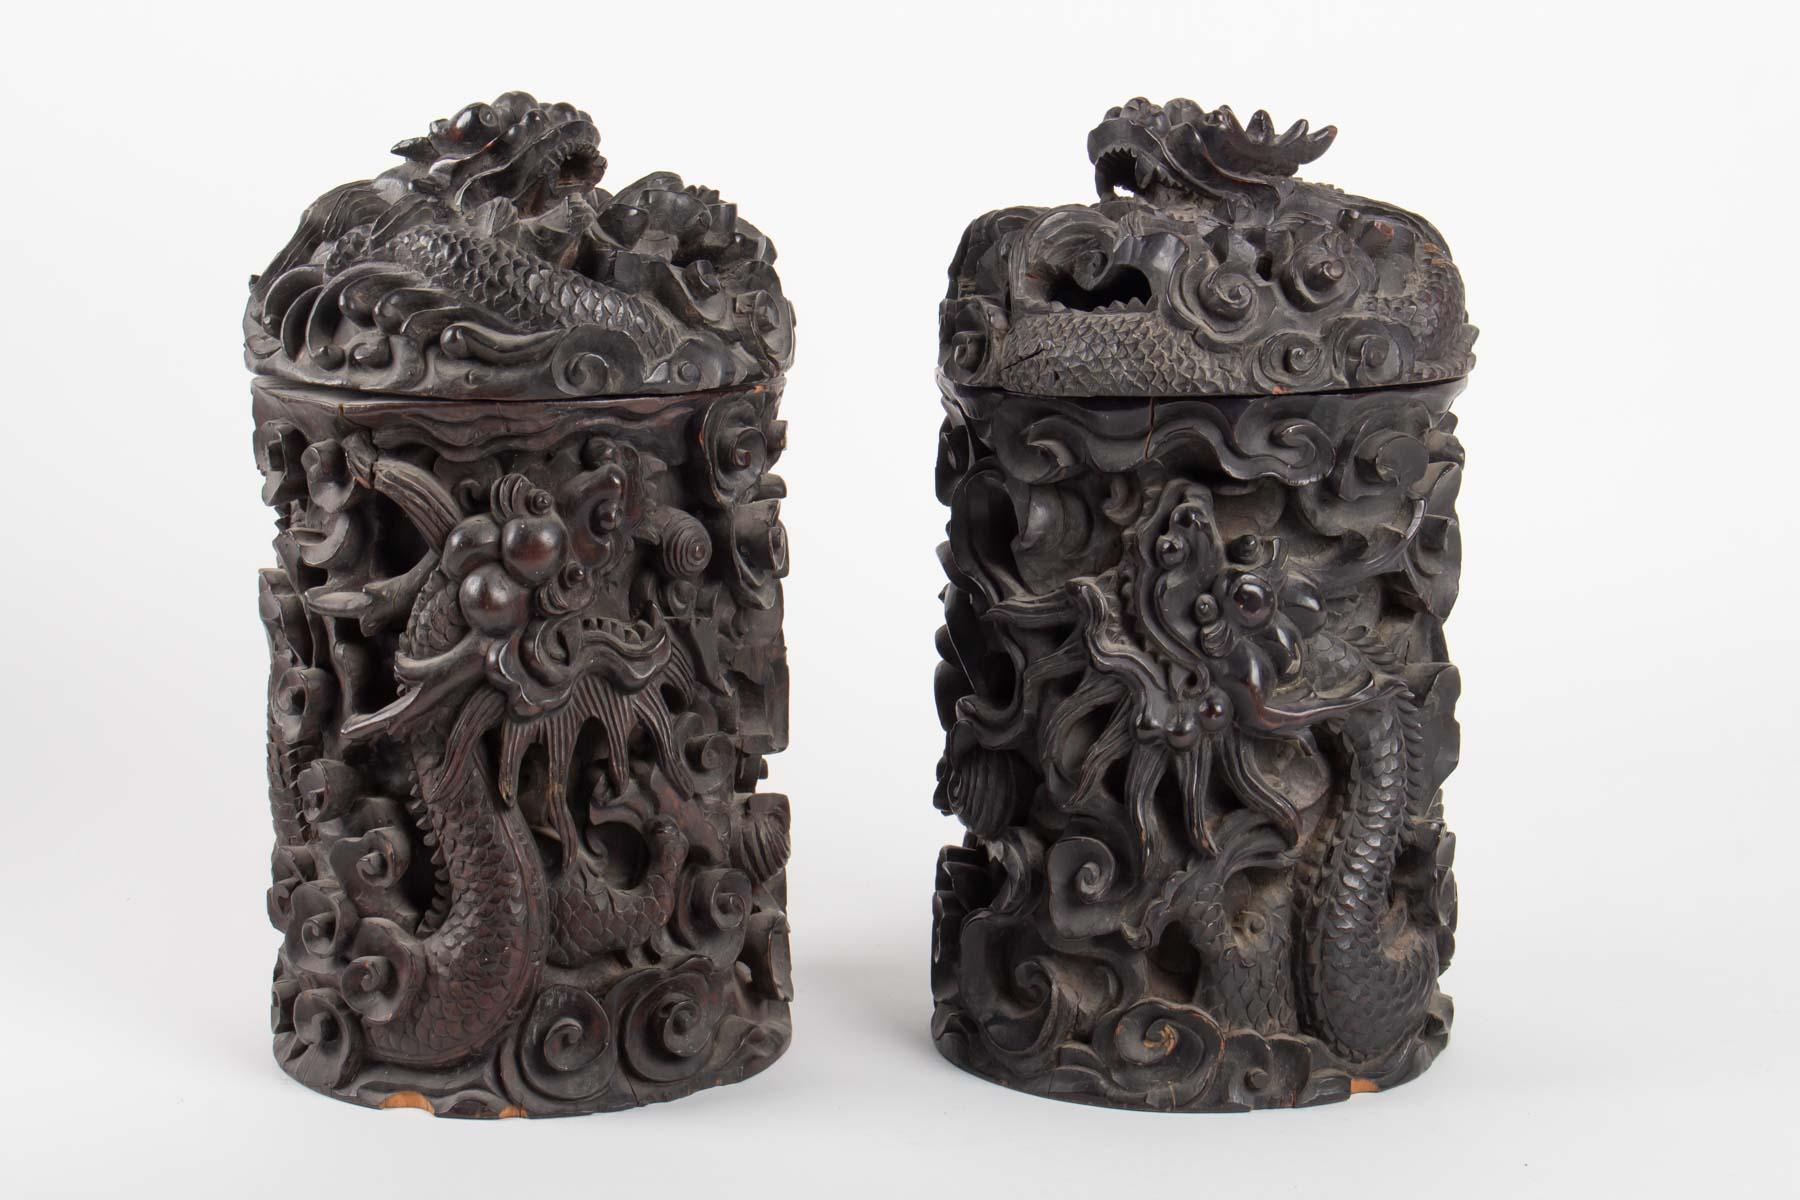 Two wooden box Indochina iron, decor dragon, 19th century
Measures: H 30cm, D 17cm.